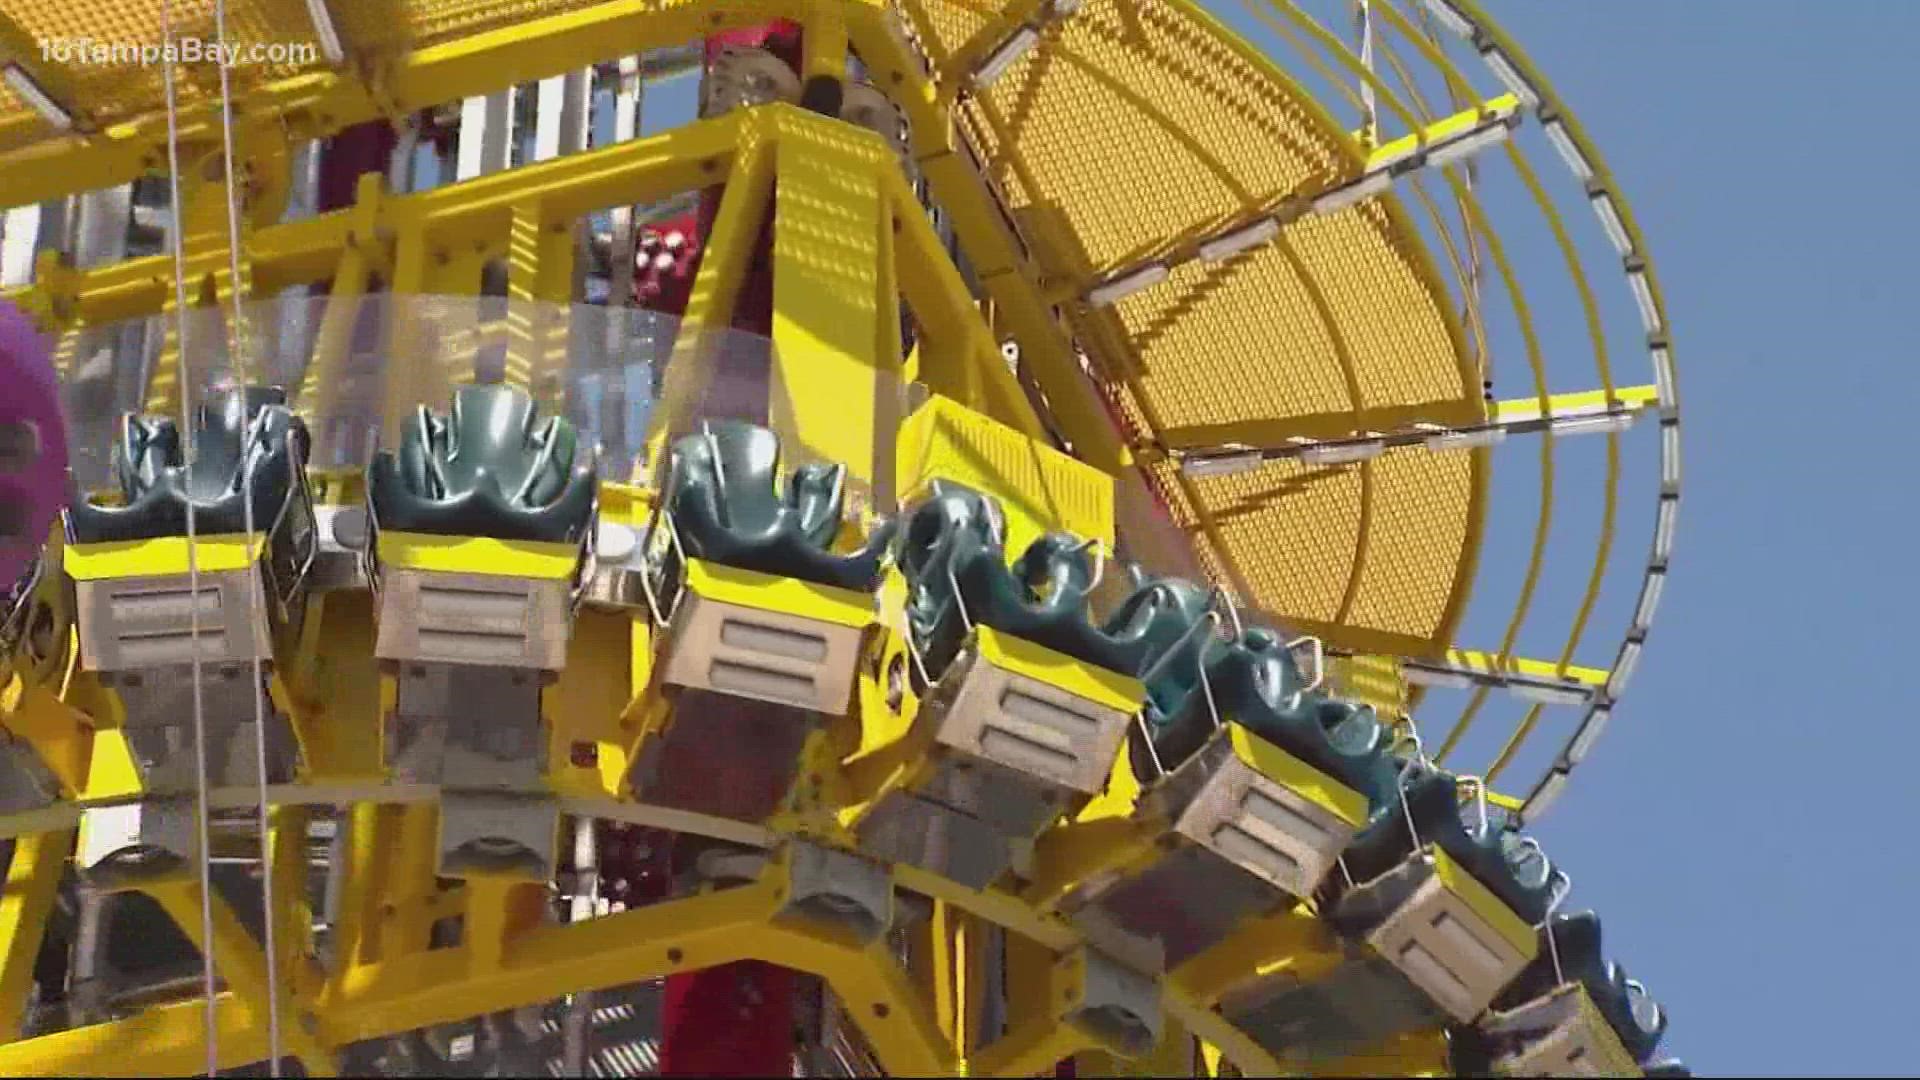 The 14-year-old died after falling from an Orlando thrill ride last month.